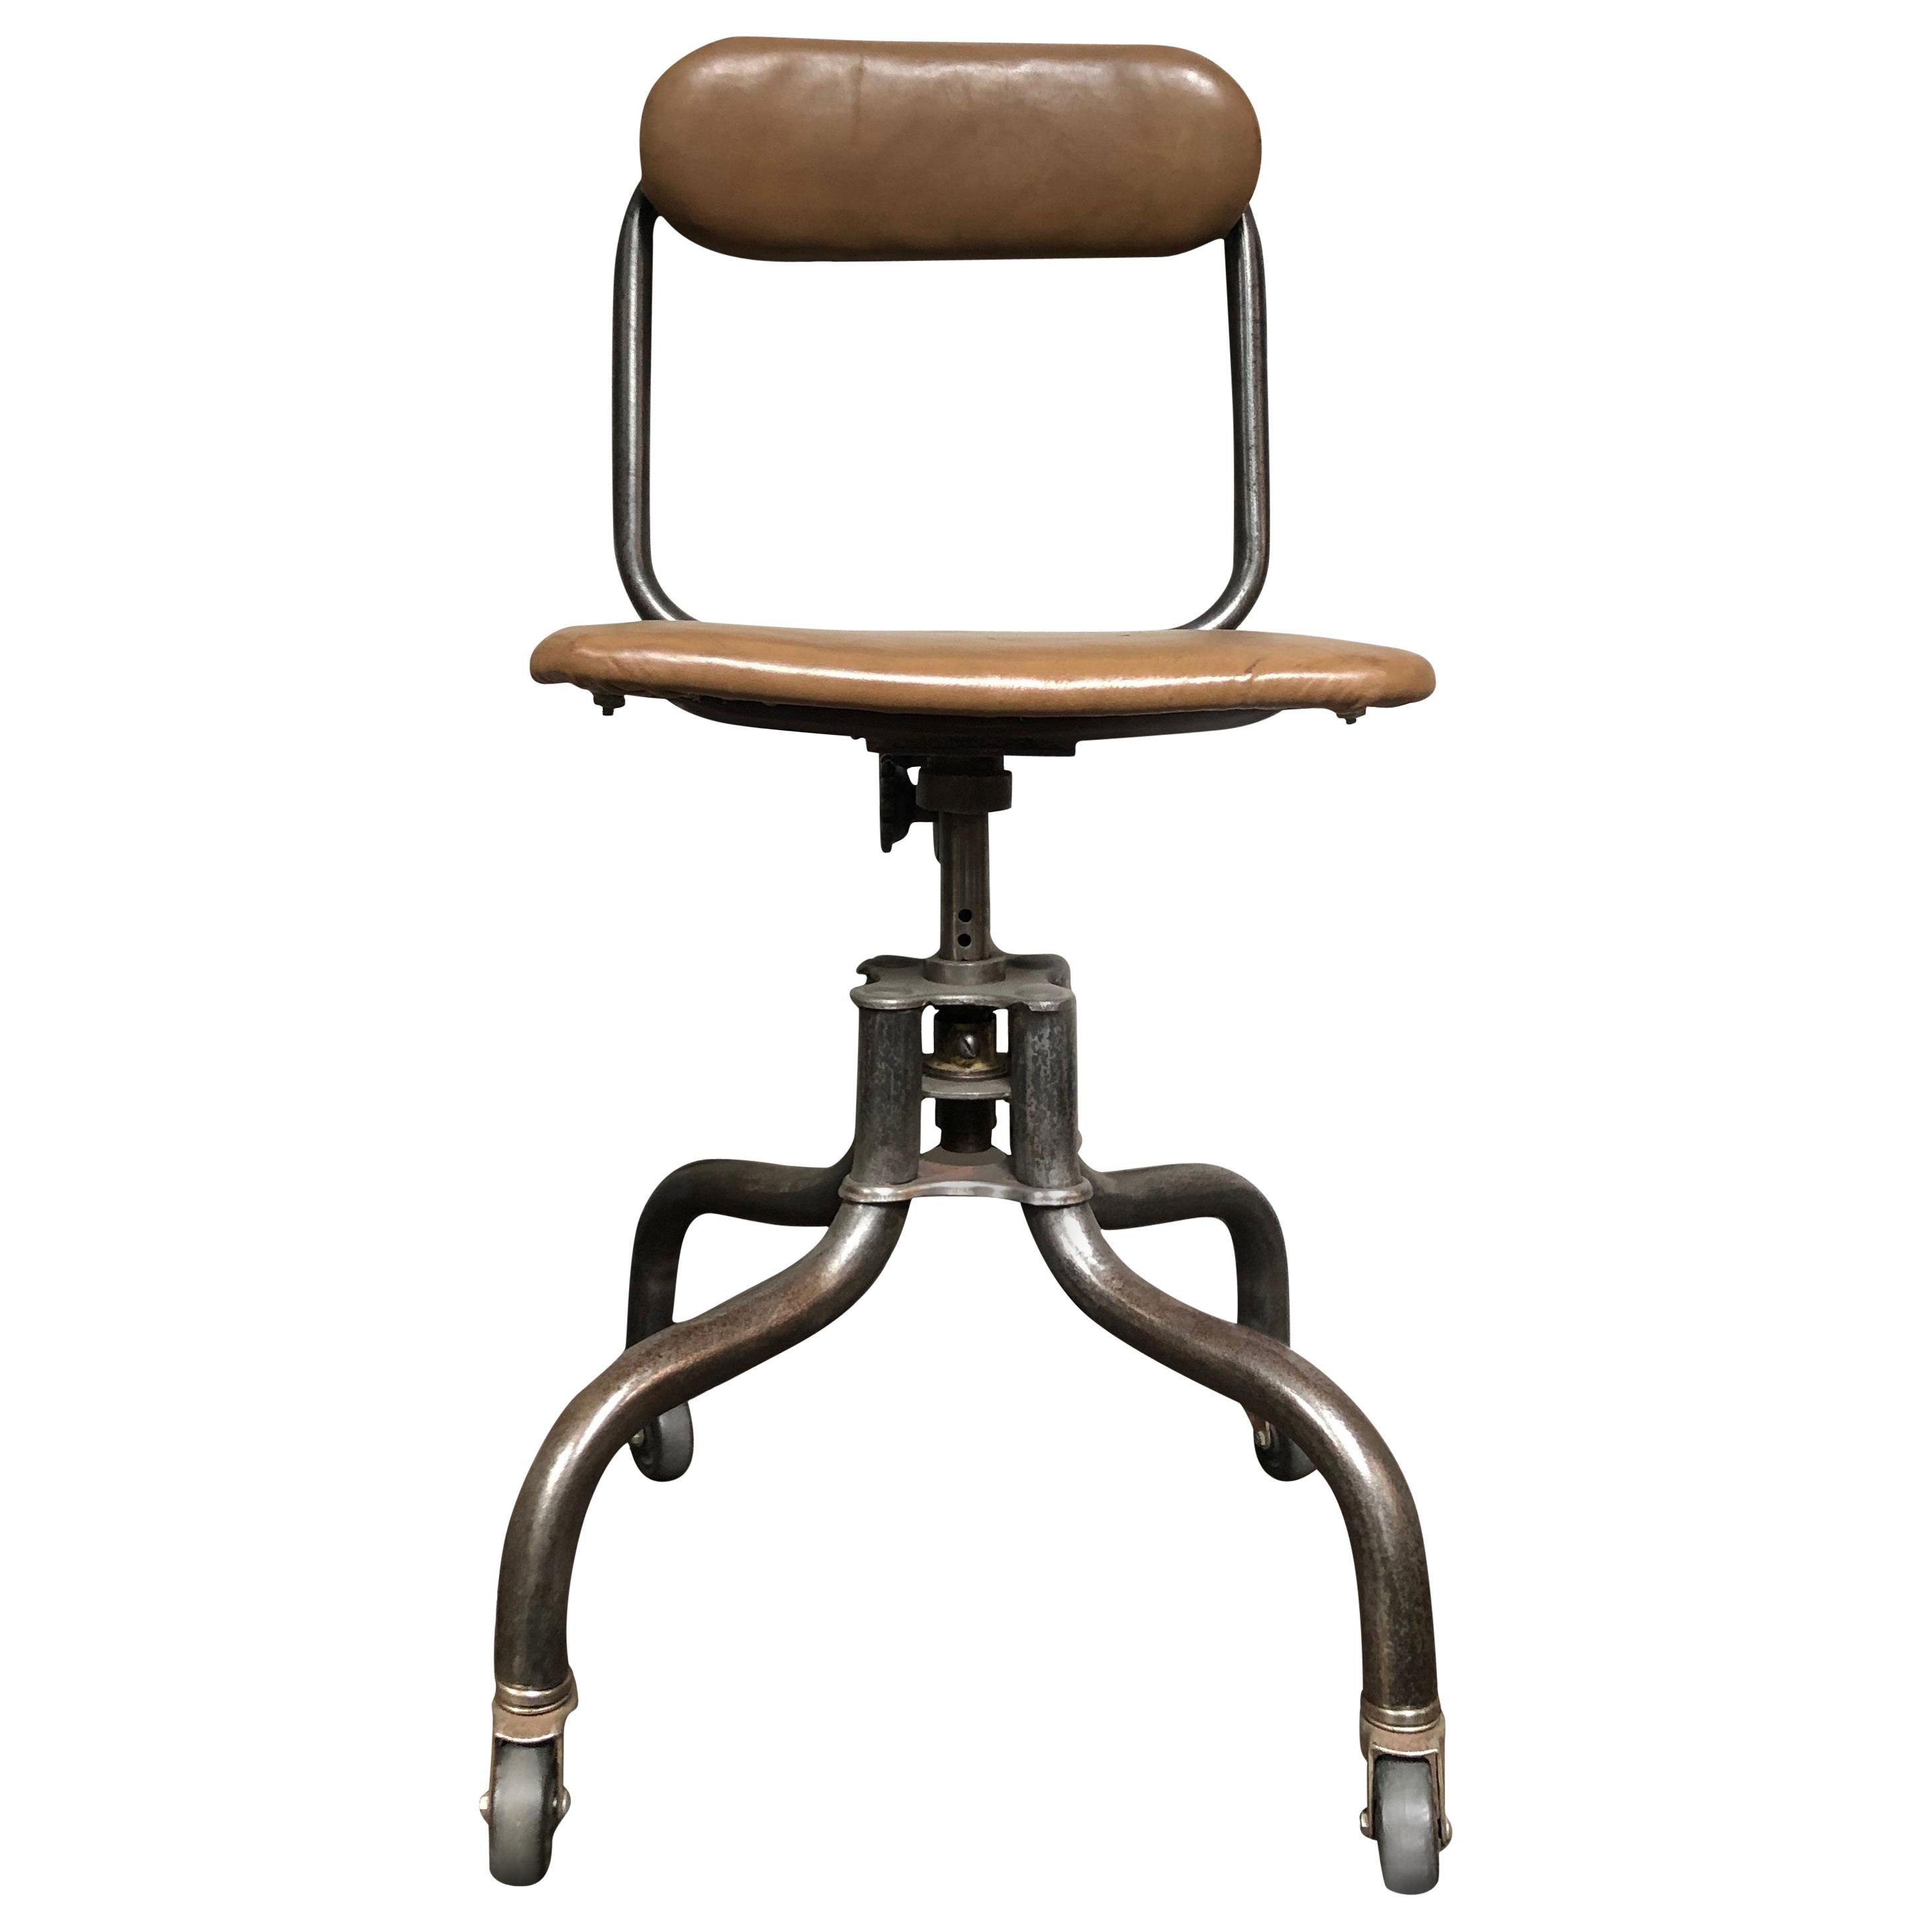 Adjustable swivel metal desk chair on wheels with leather seat and back from the 1940s. 